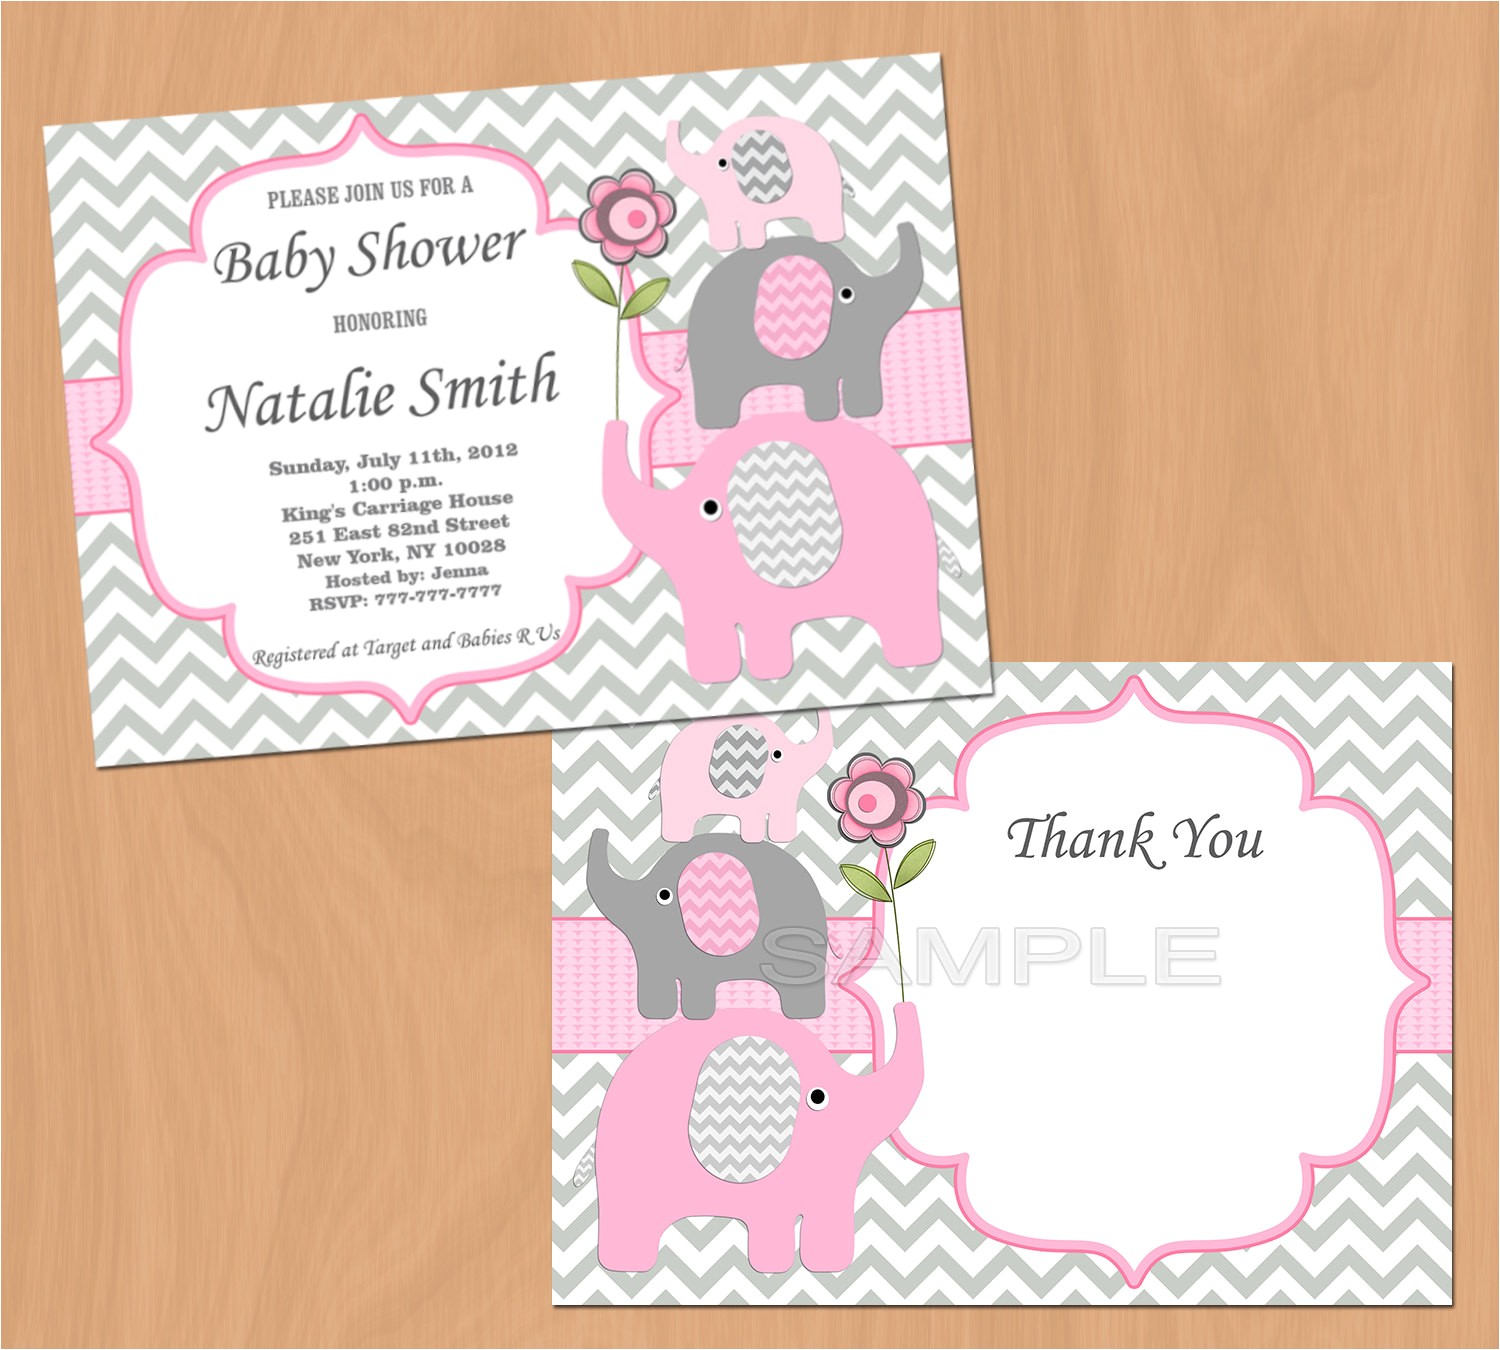 great baby shower invitations cheap price